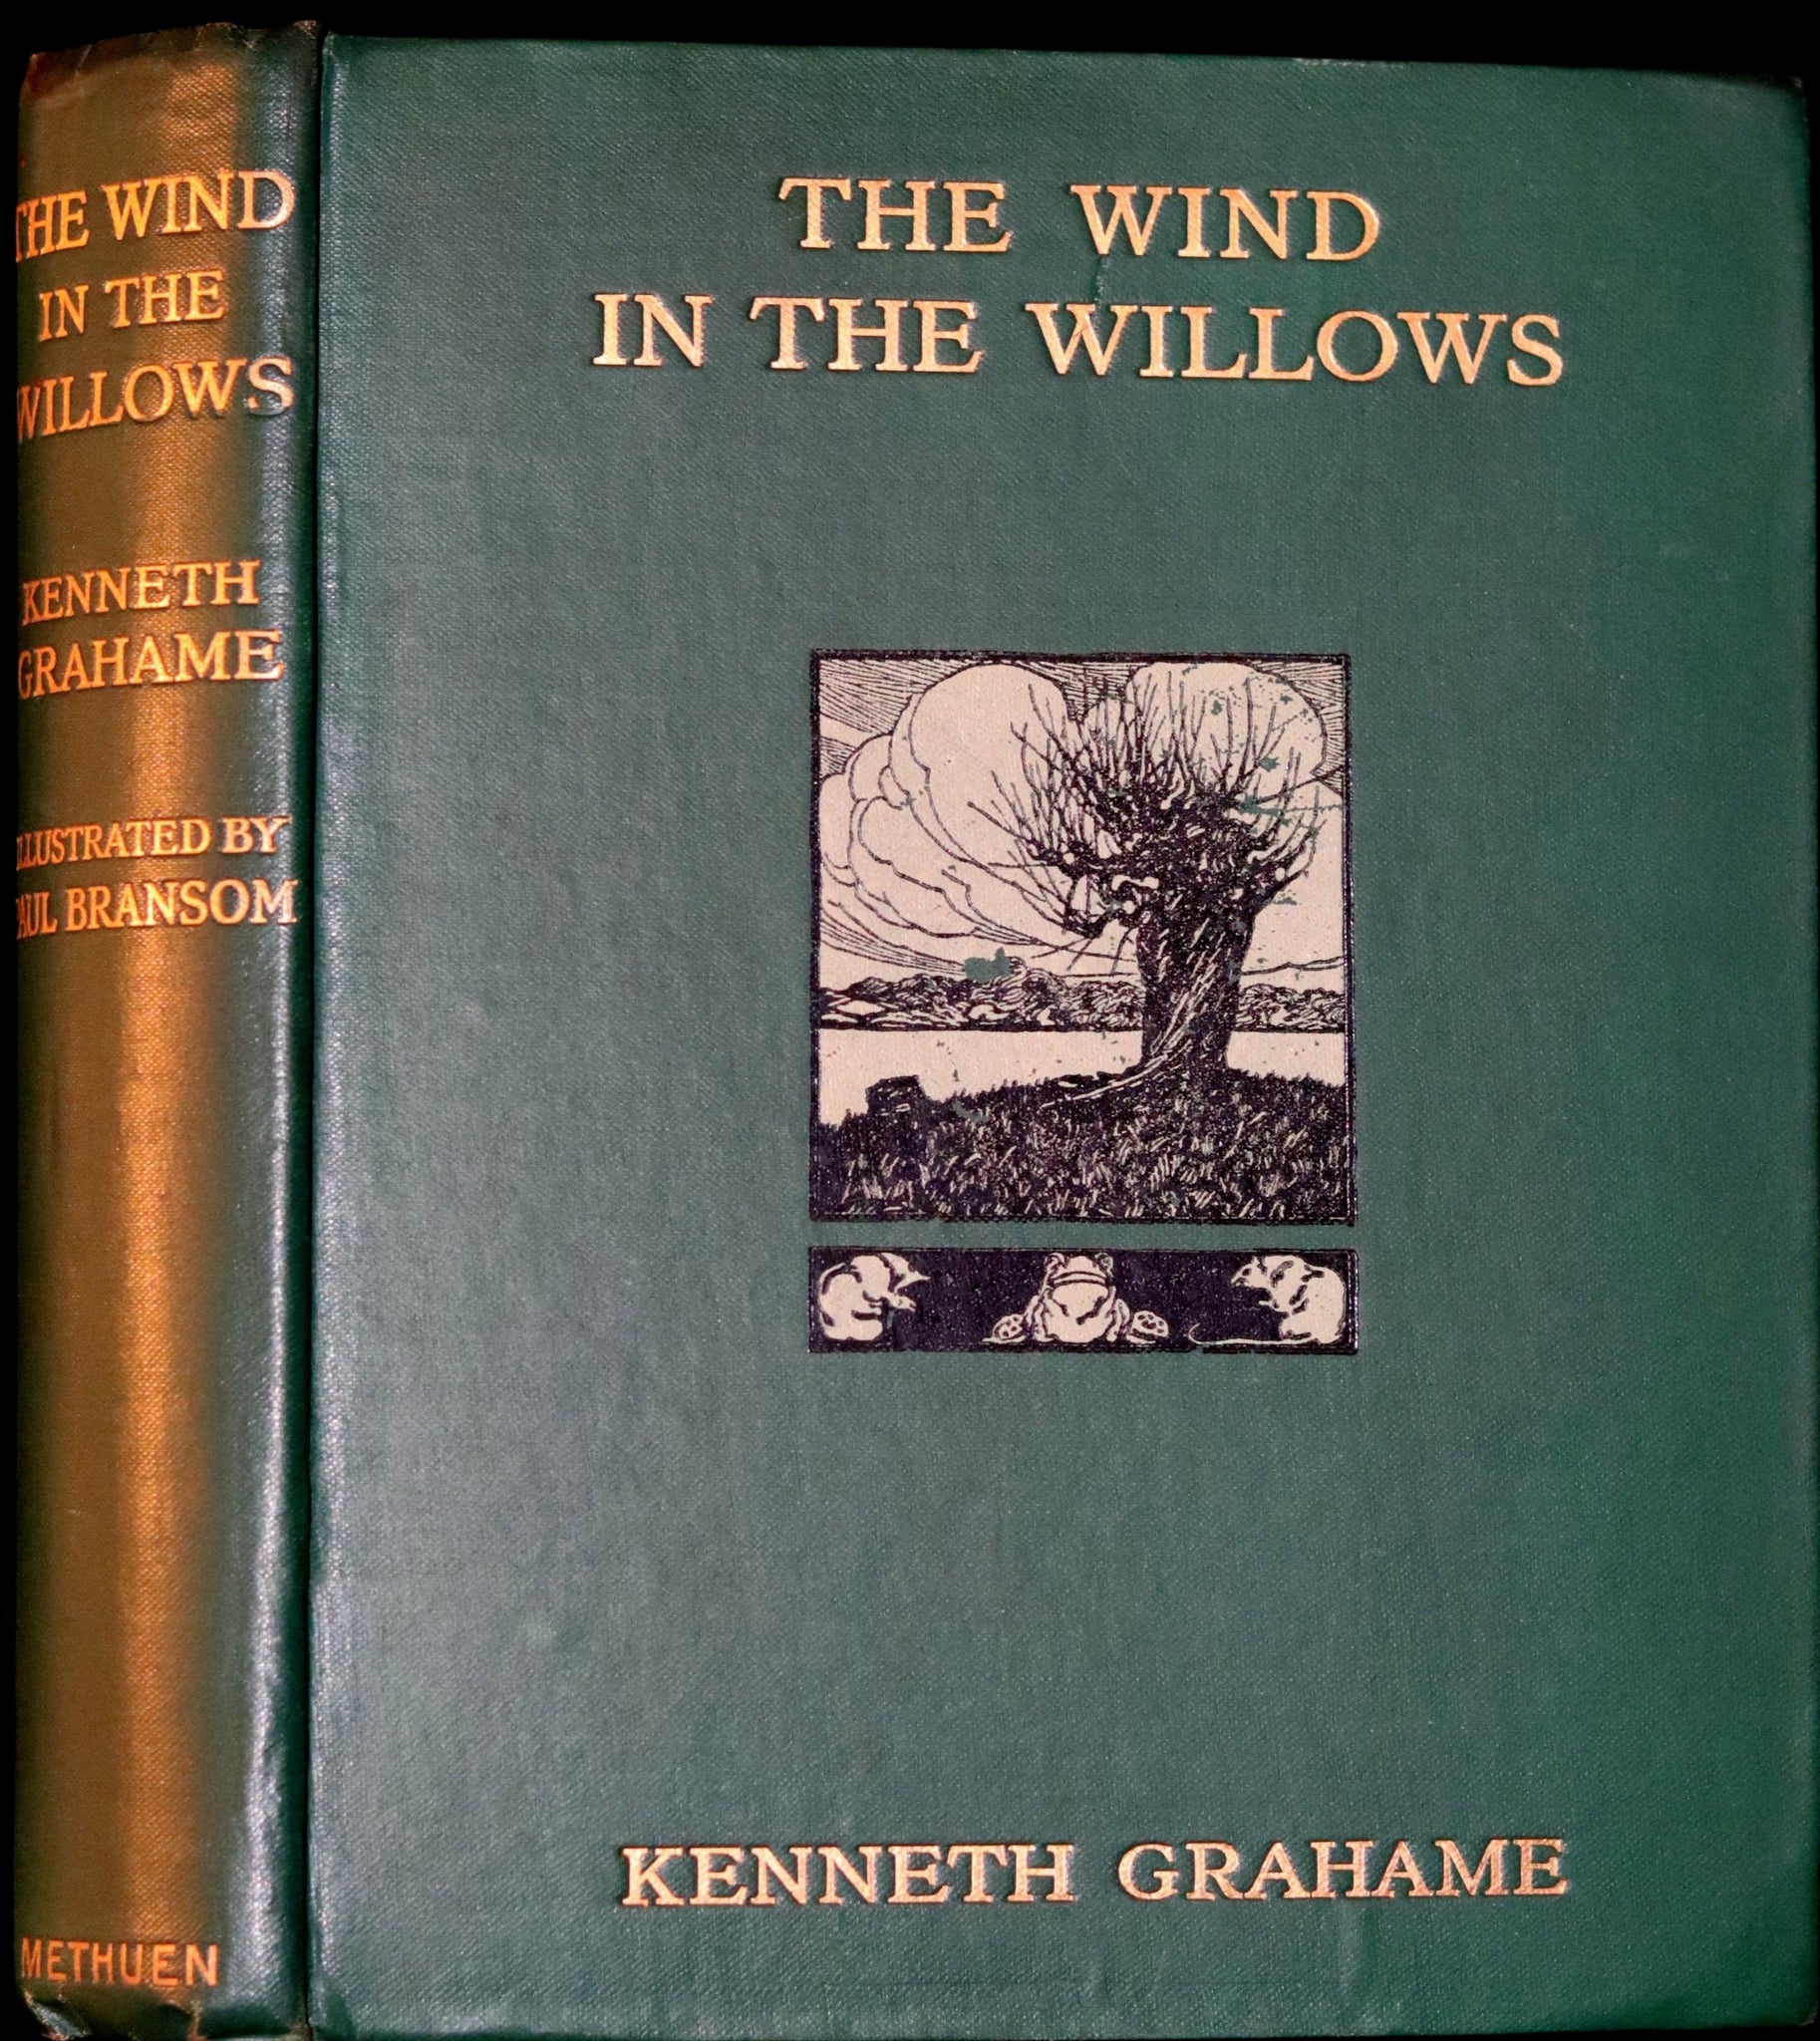 1913 First Edition by Paul BRANSOM - The WIND IN THE WILLOWS by Kenneth Grahame.